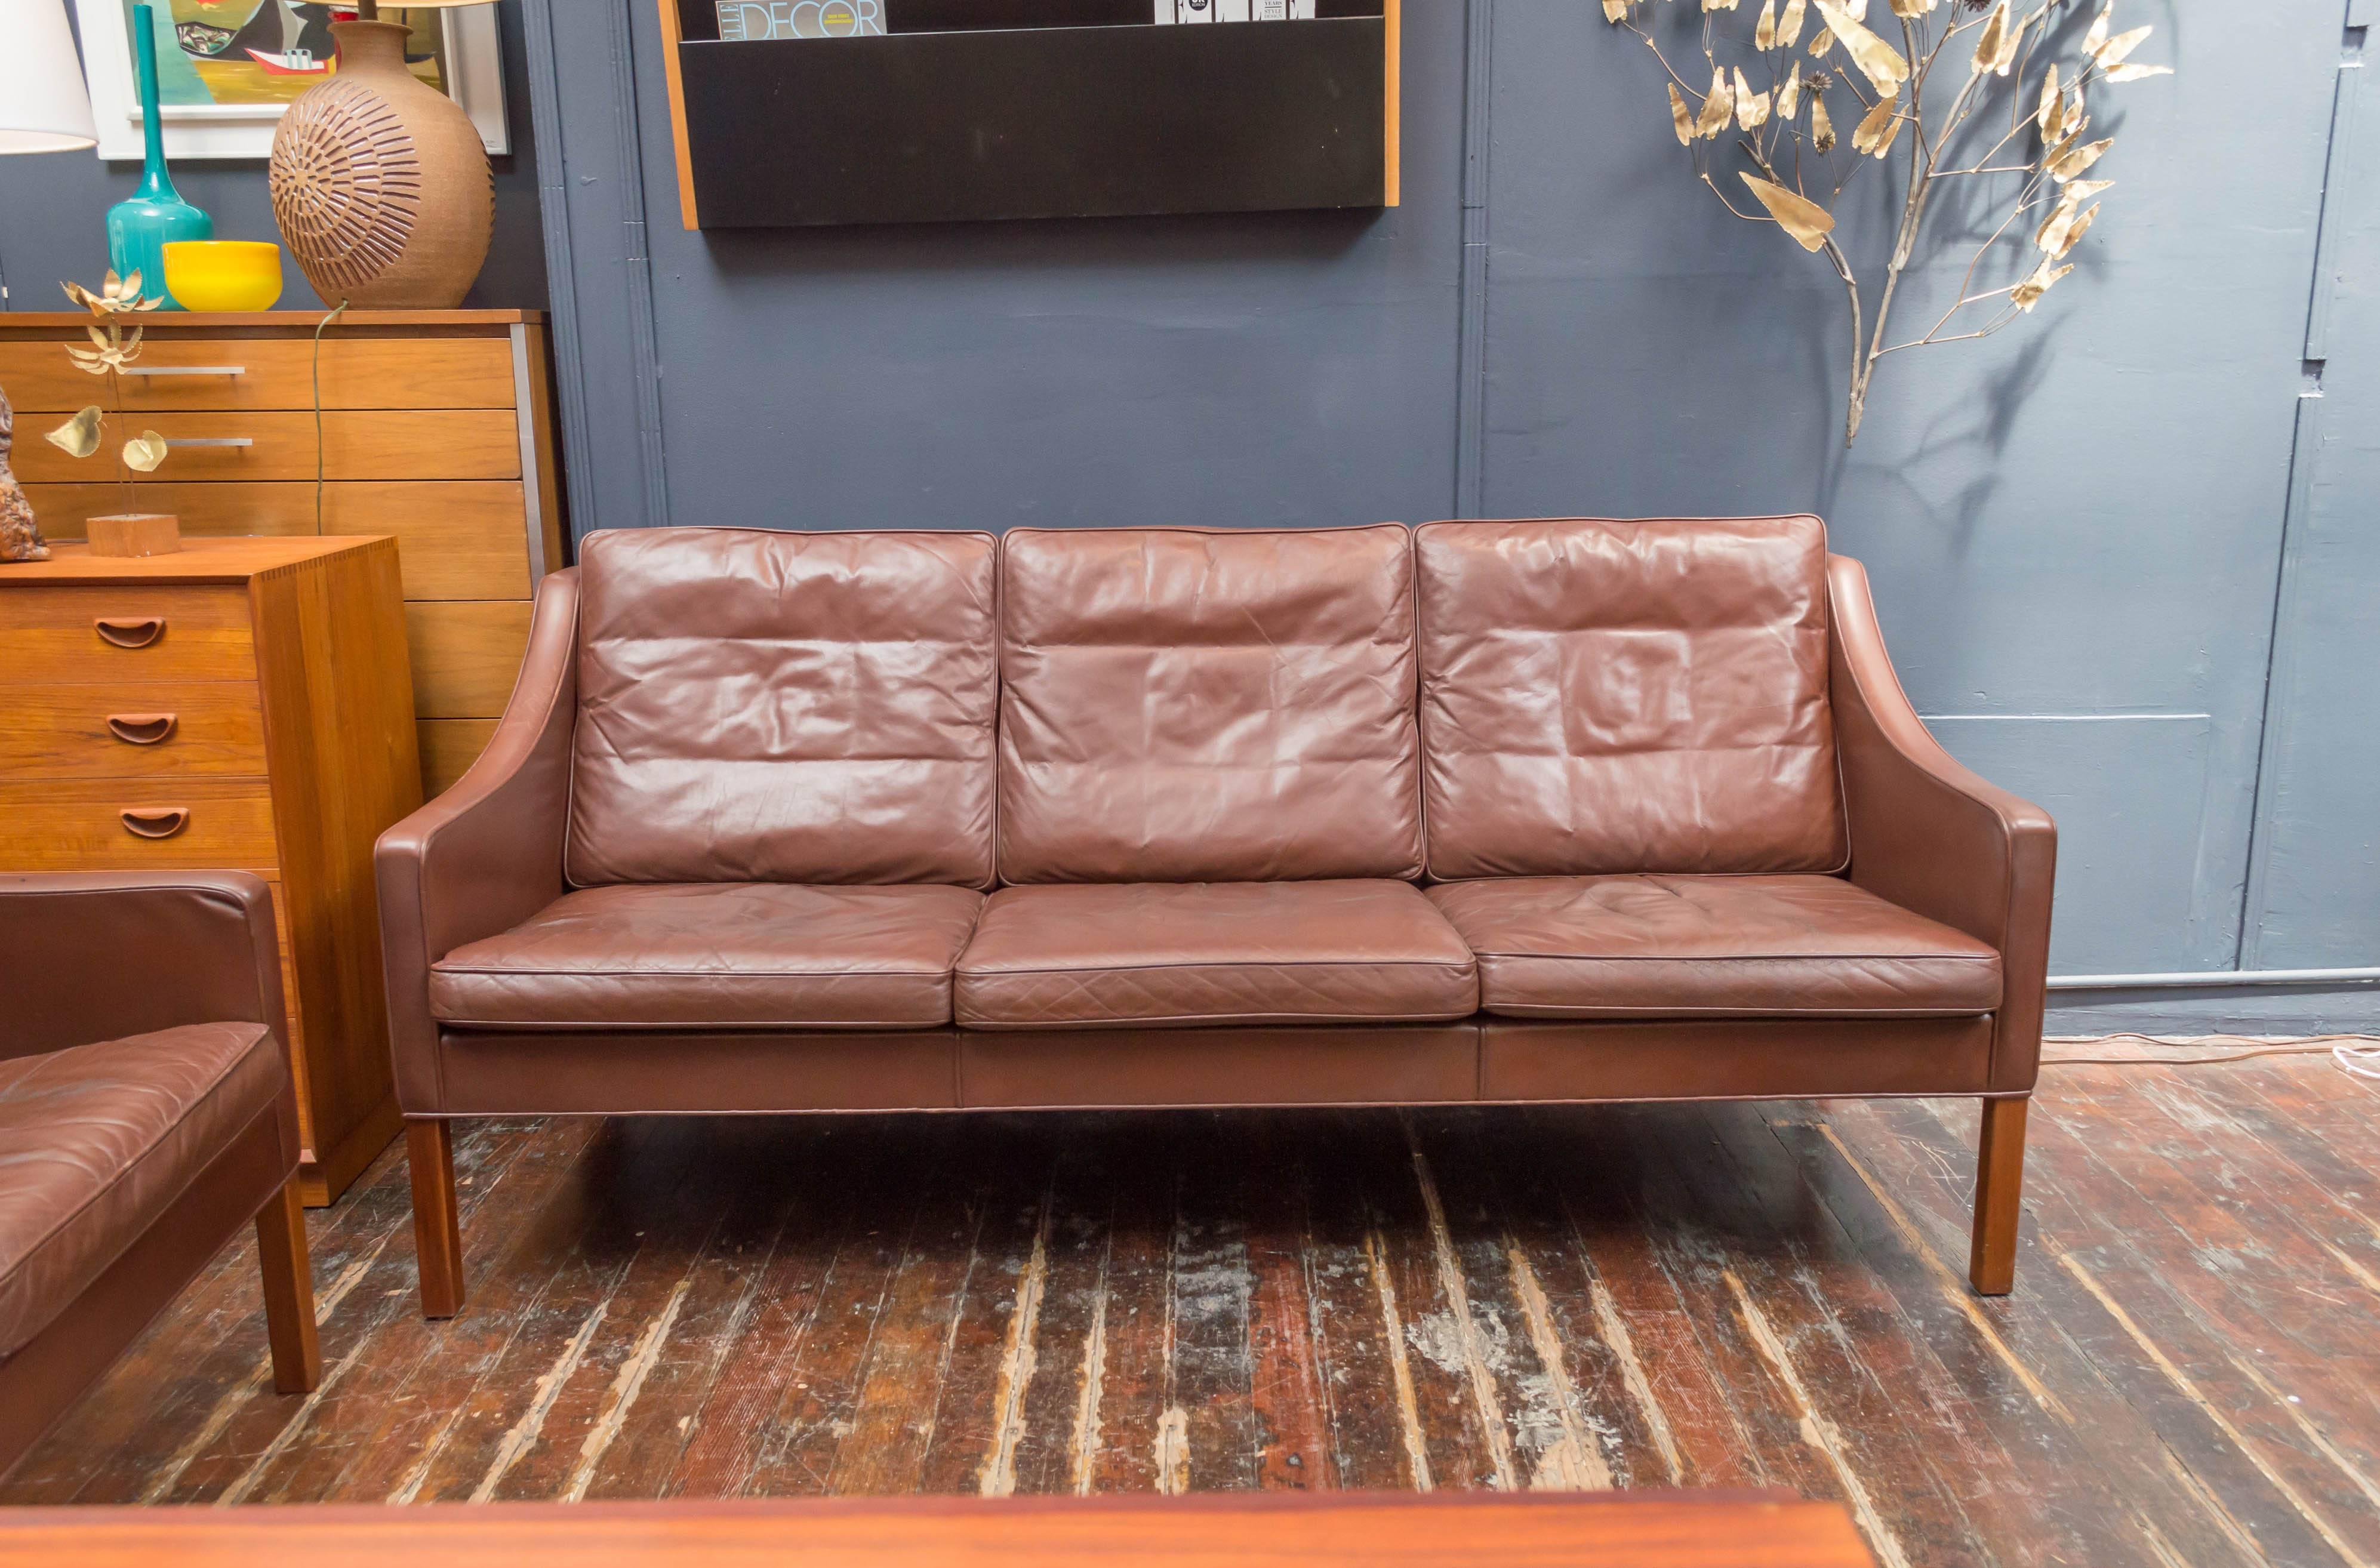 Børge Mogensen design cognac leather sofa for Fredericka, Denmark. Purchased from the original owners in good vintage condition with age appropriate wear and tear. 
Matching armchairs are available sold separately.